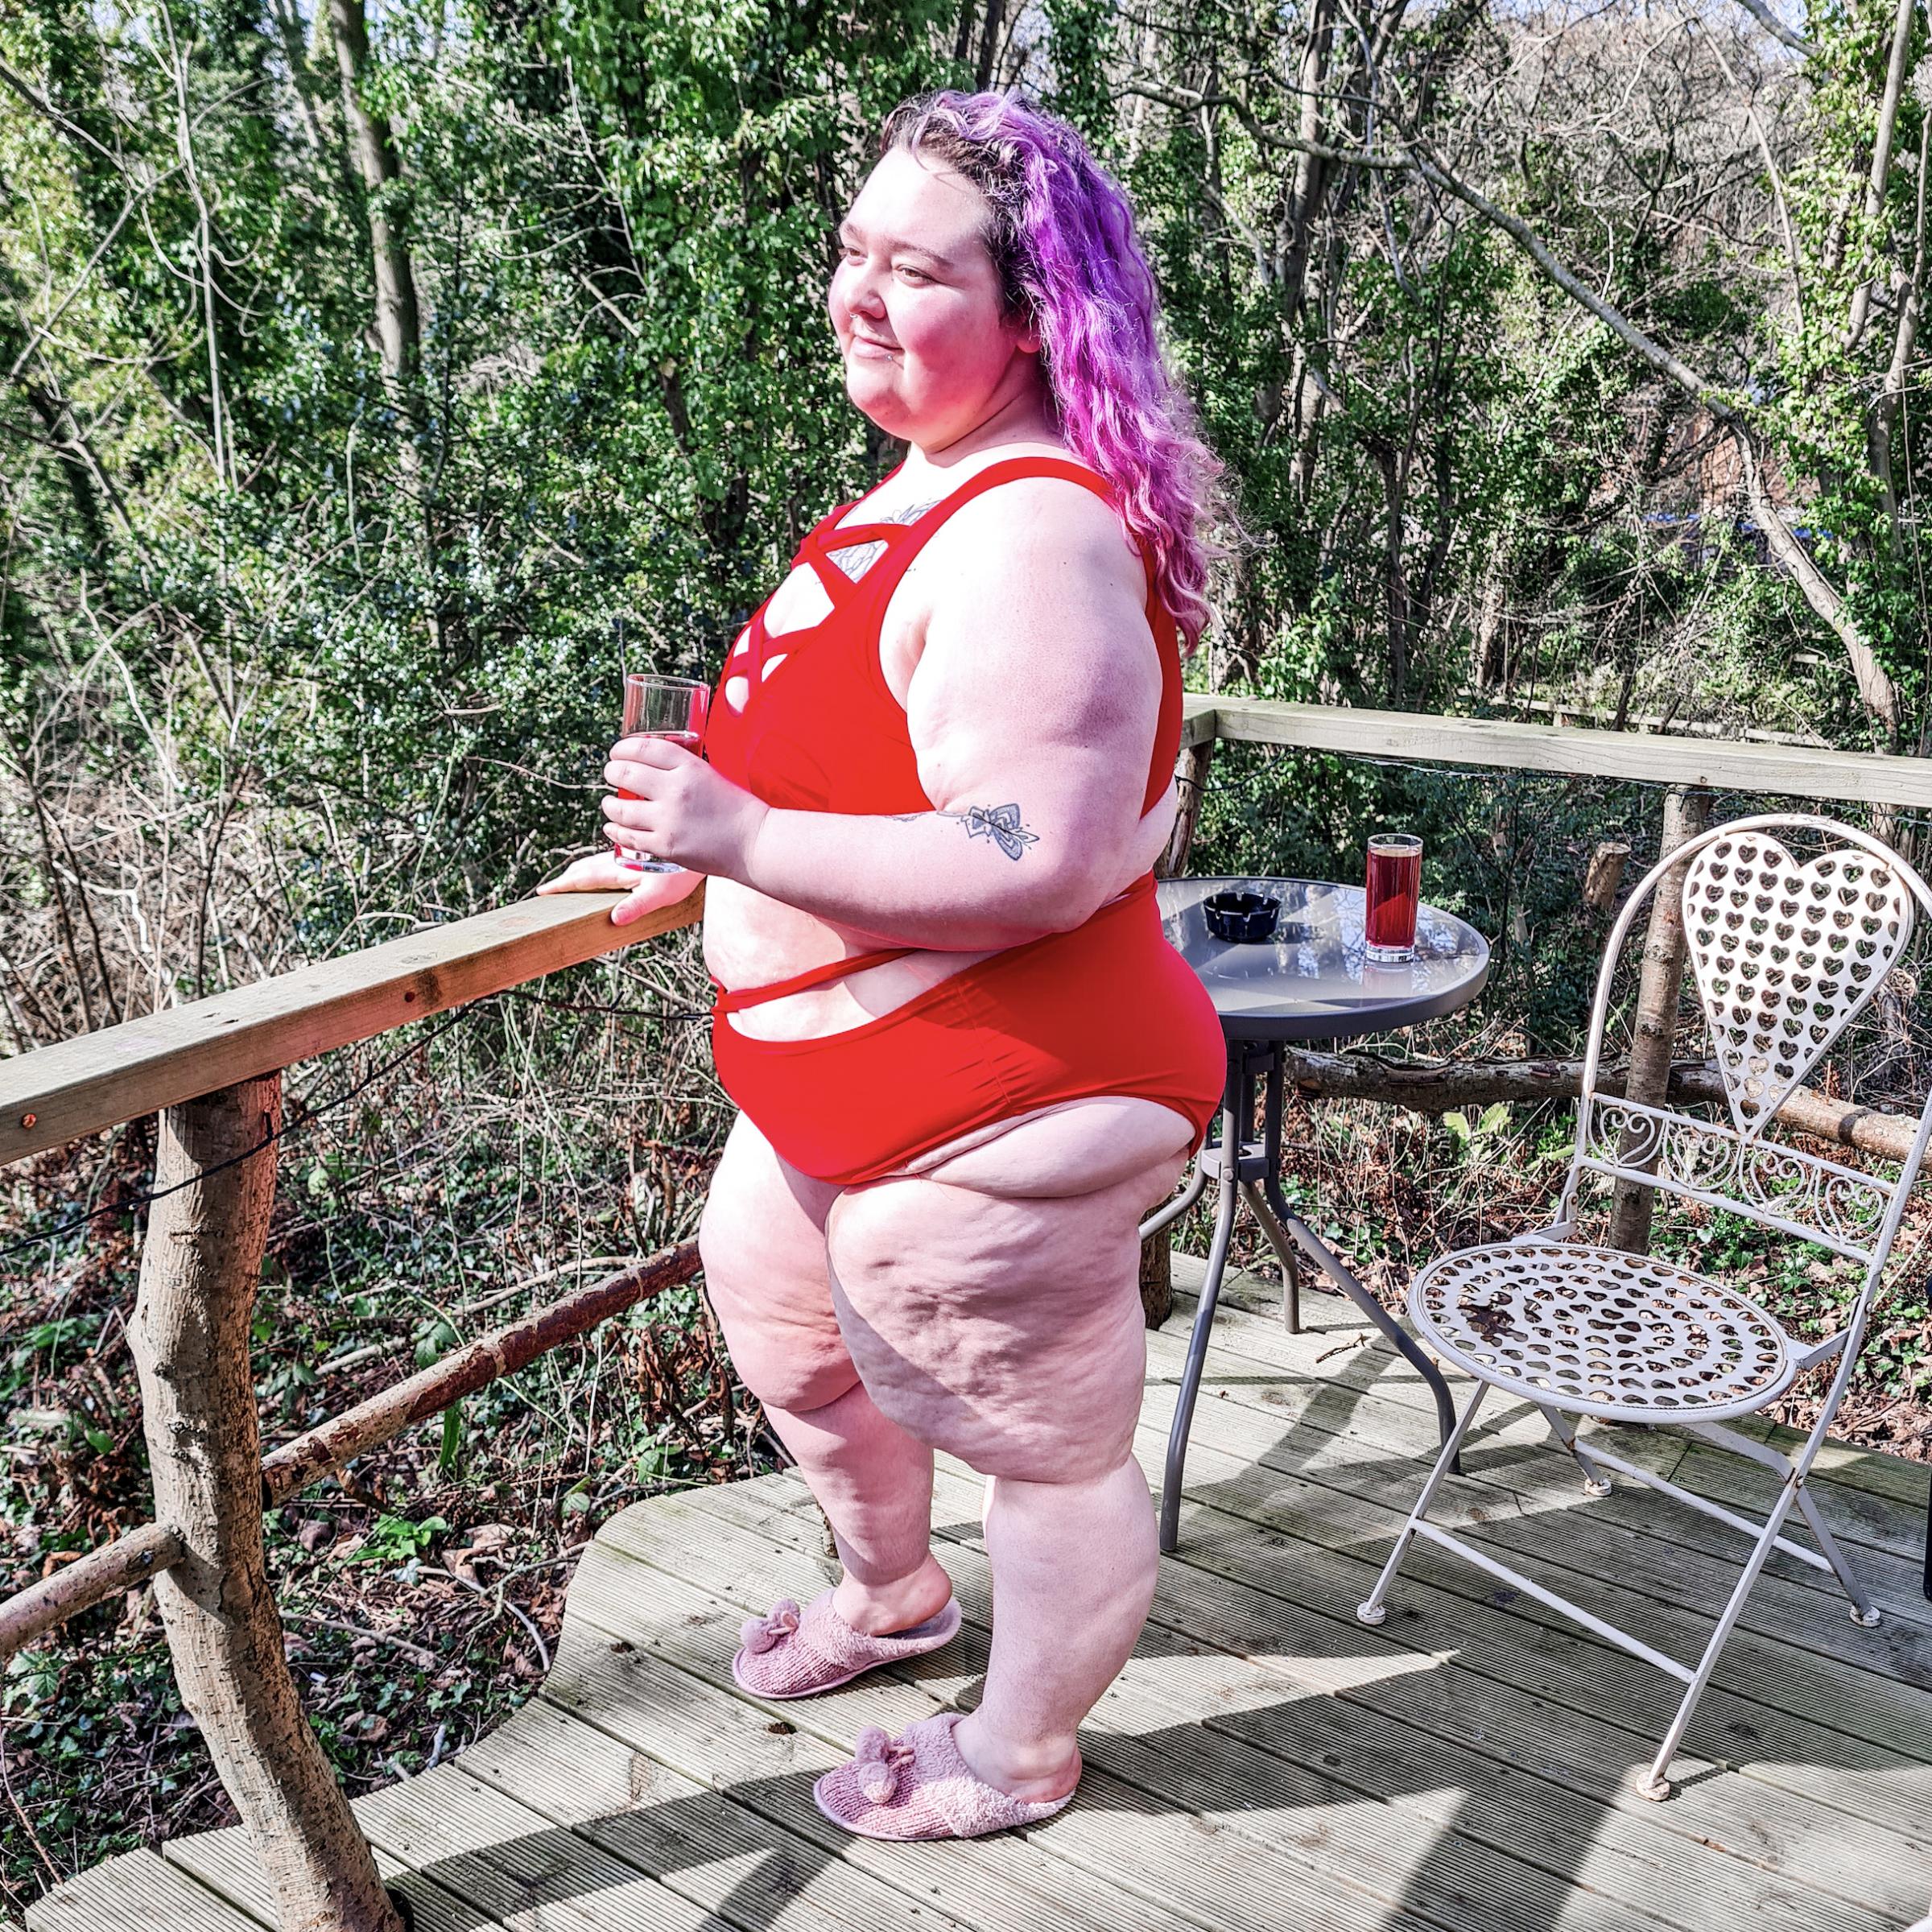 Beckie from Llandudno has embraced body positivity. Photo: SWNS